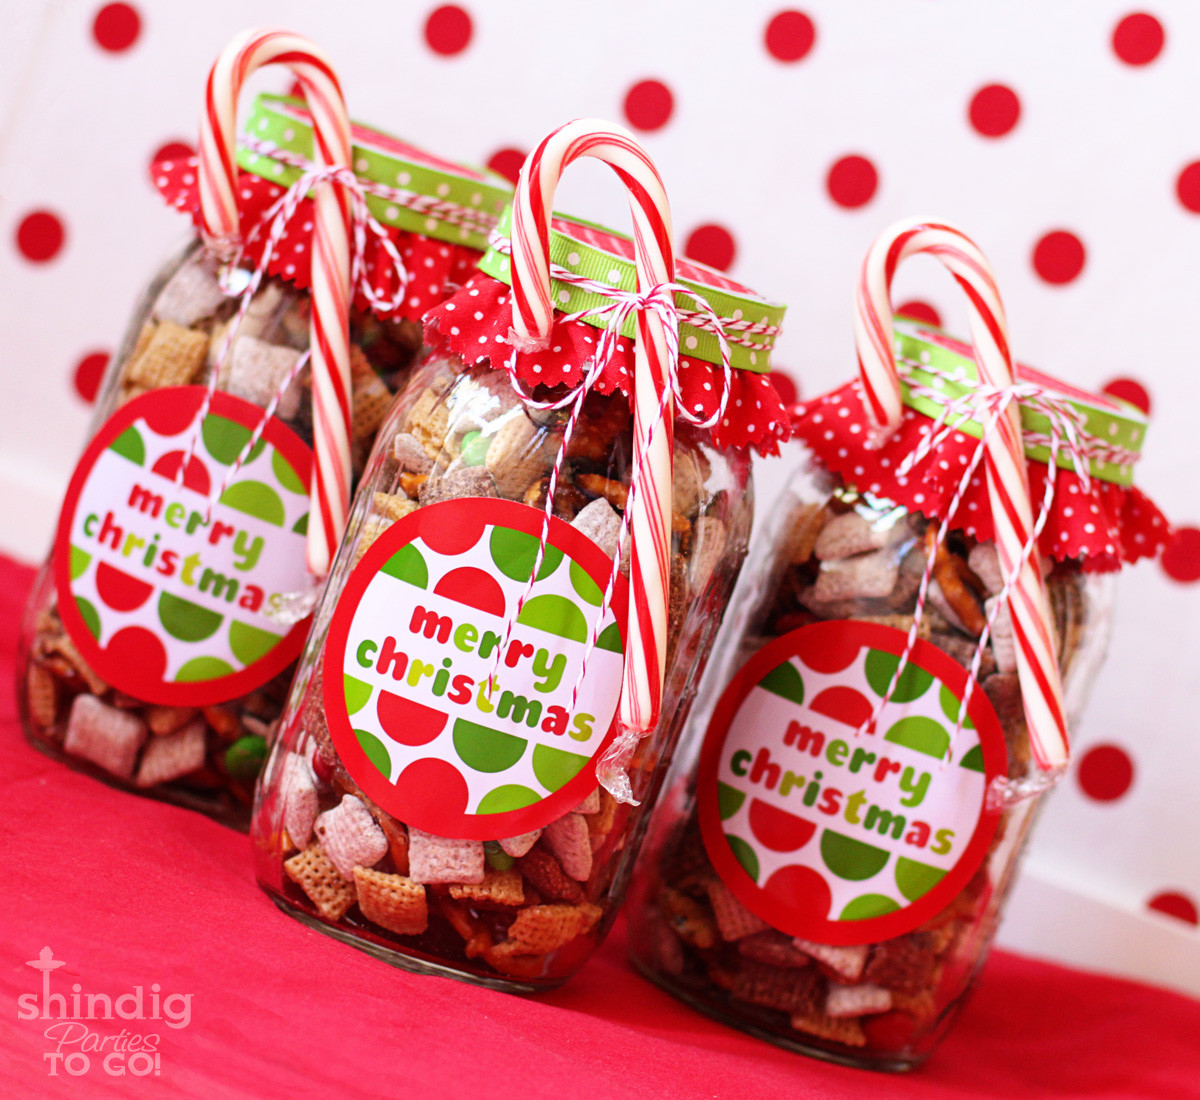 Homemade Gift Ideas For Christmas
 Amanda s Parties To Go FREE Merry Christmas Tags and Gift